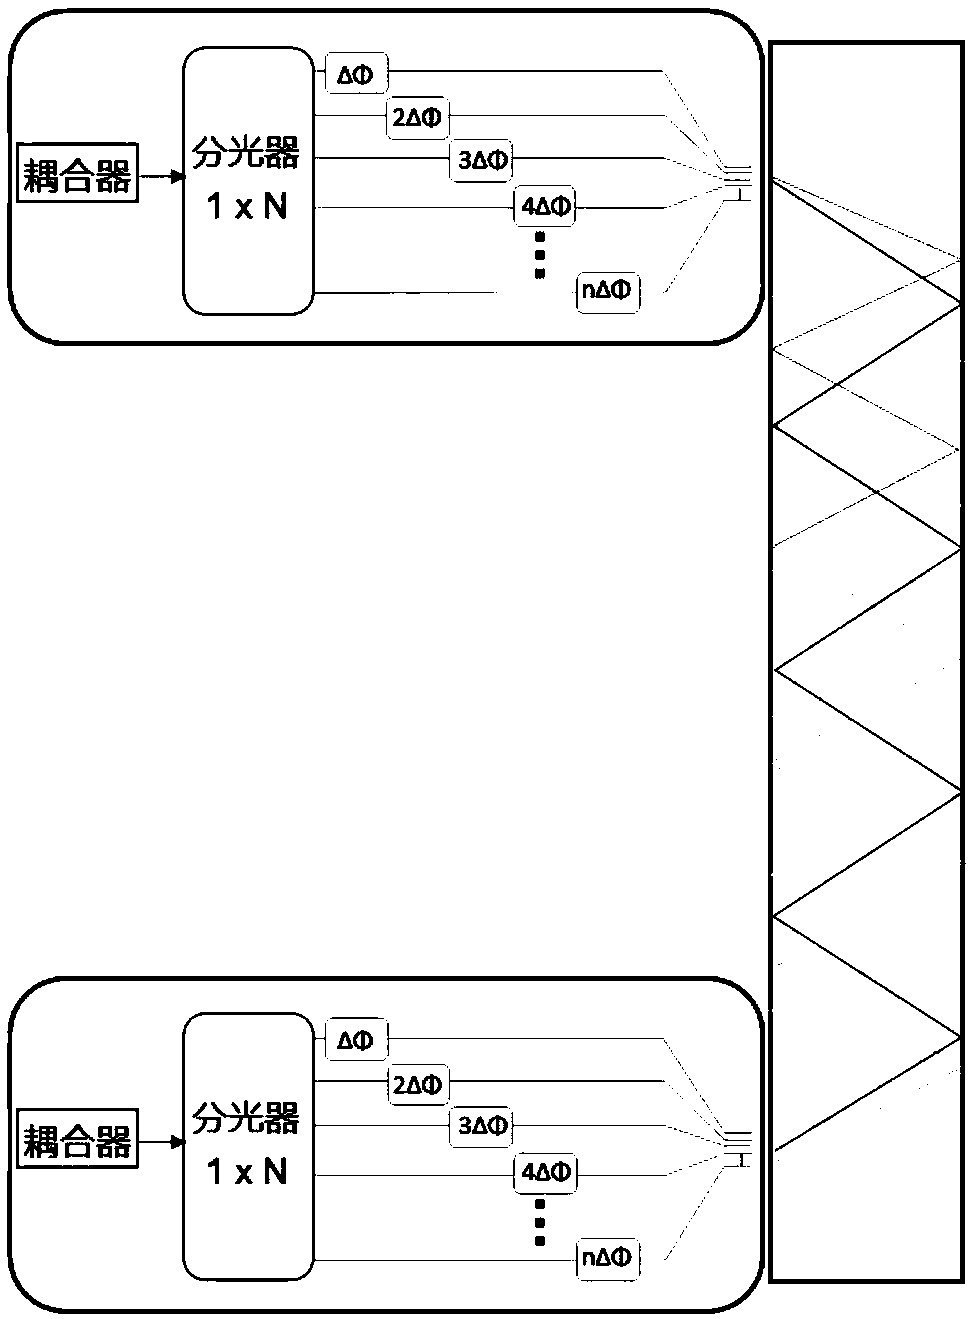 Silicon-based integrated optical adjustable delay line based on optical phased array